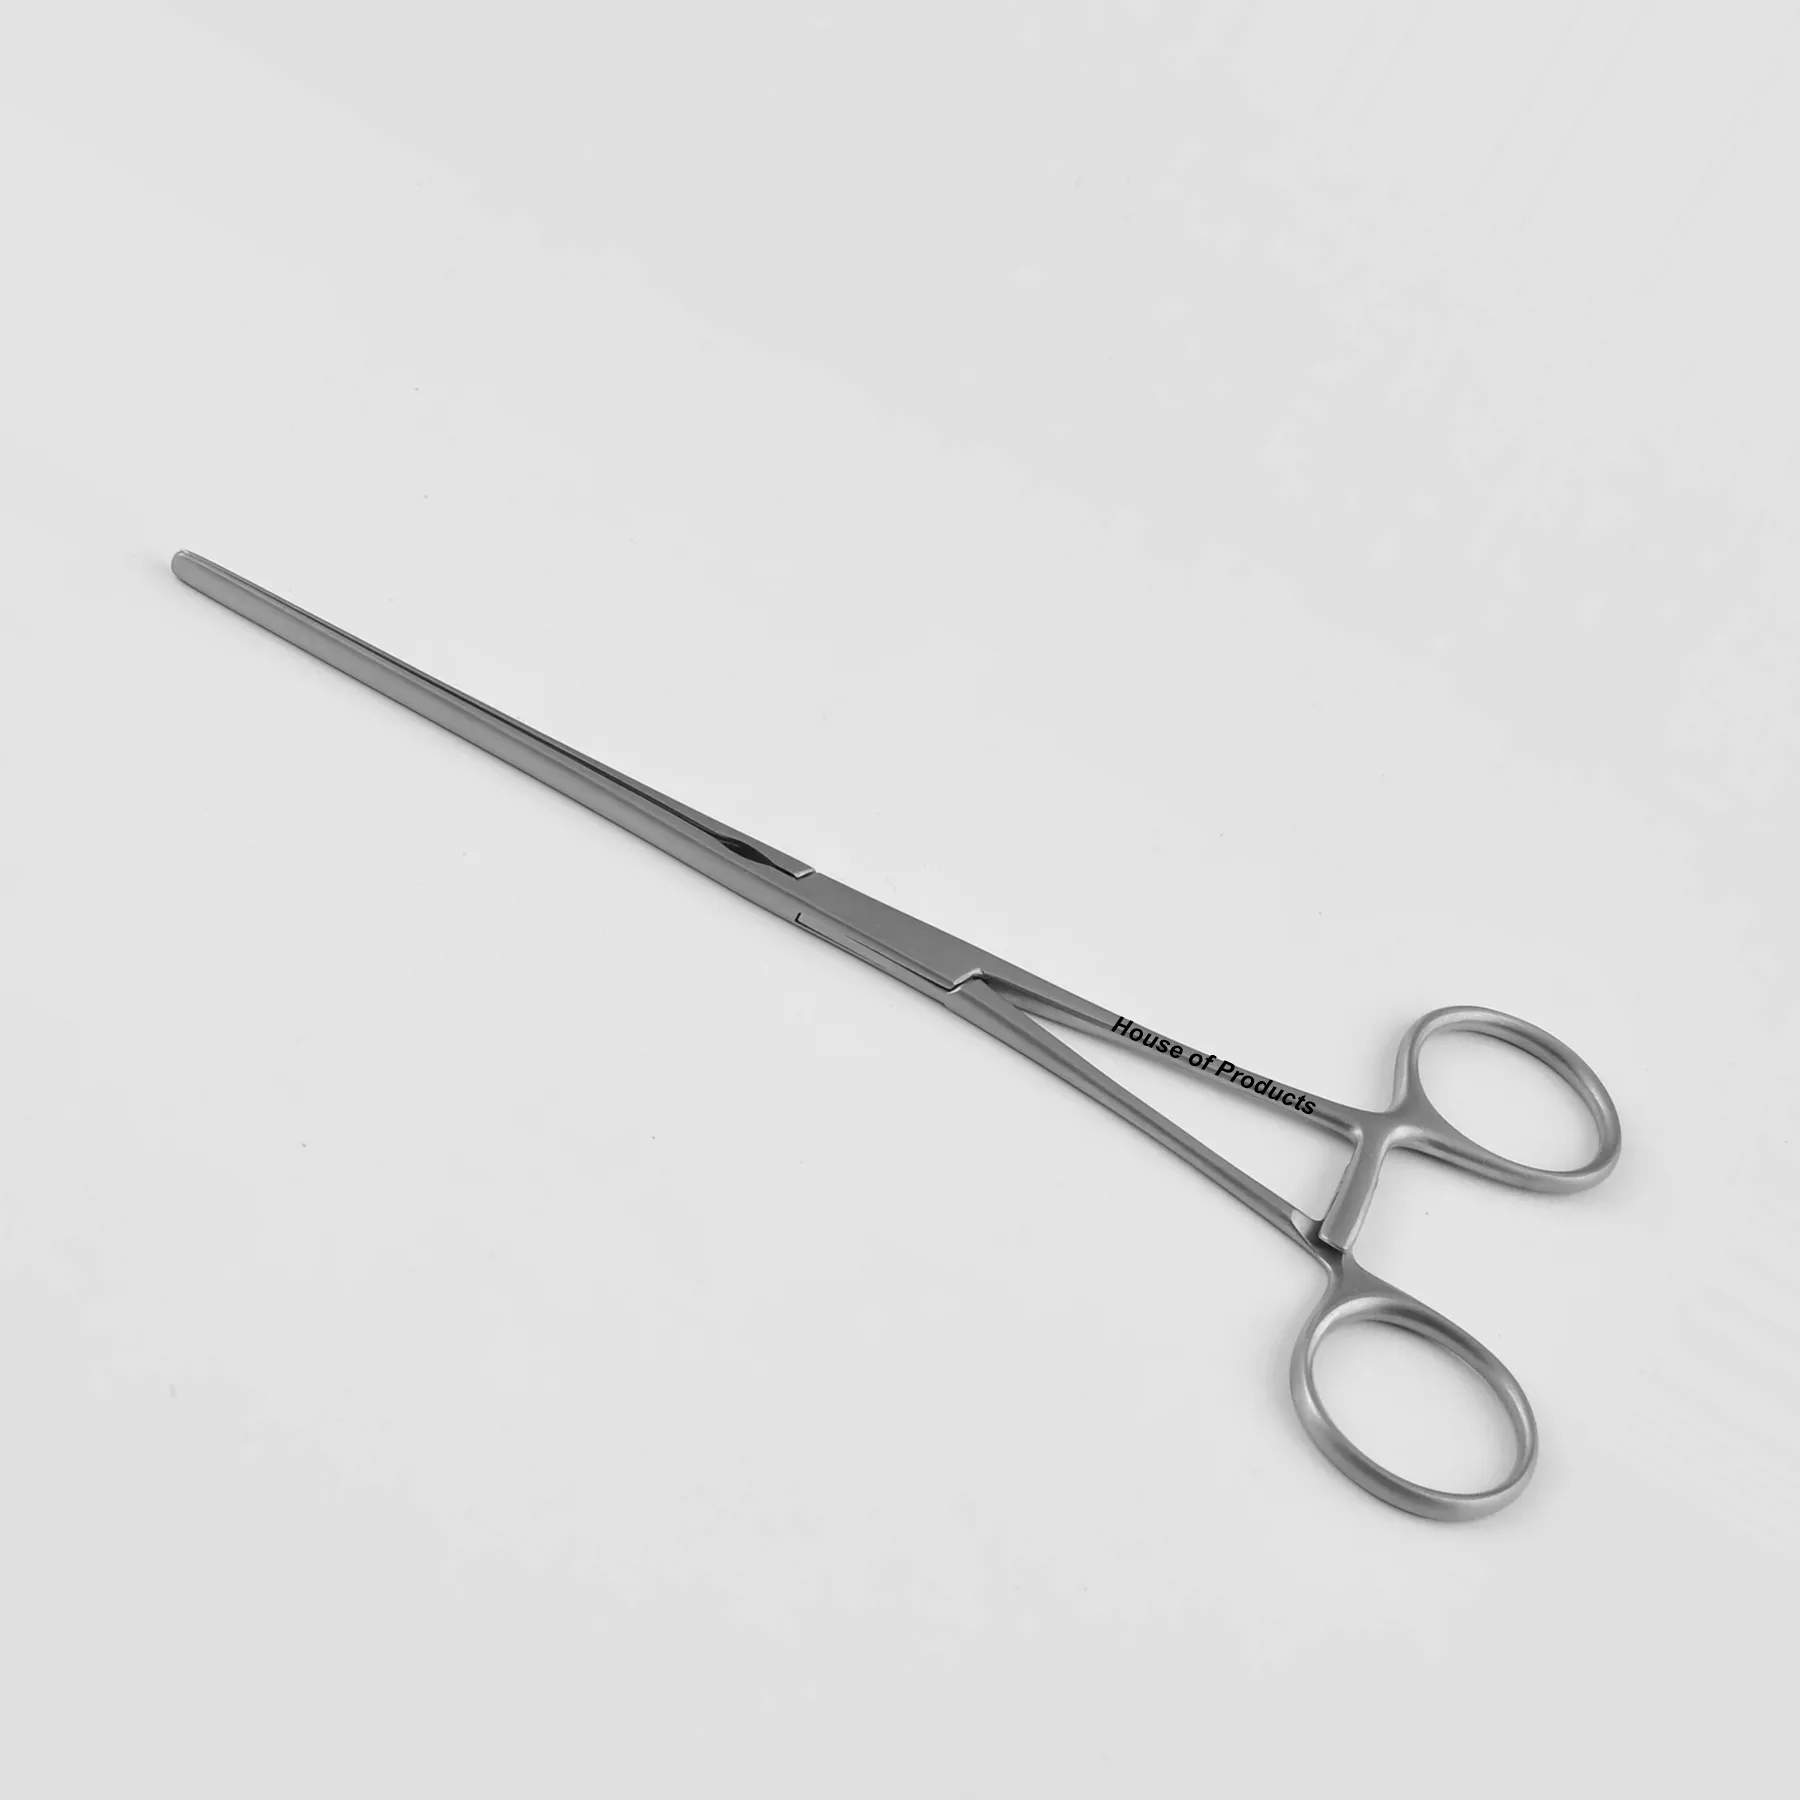 Intestinal Forceps Soft Japan 18Cm Curved Surgical Instruments CE ISO Certified Surgical Forceps